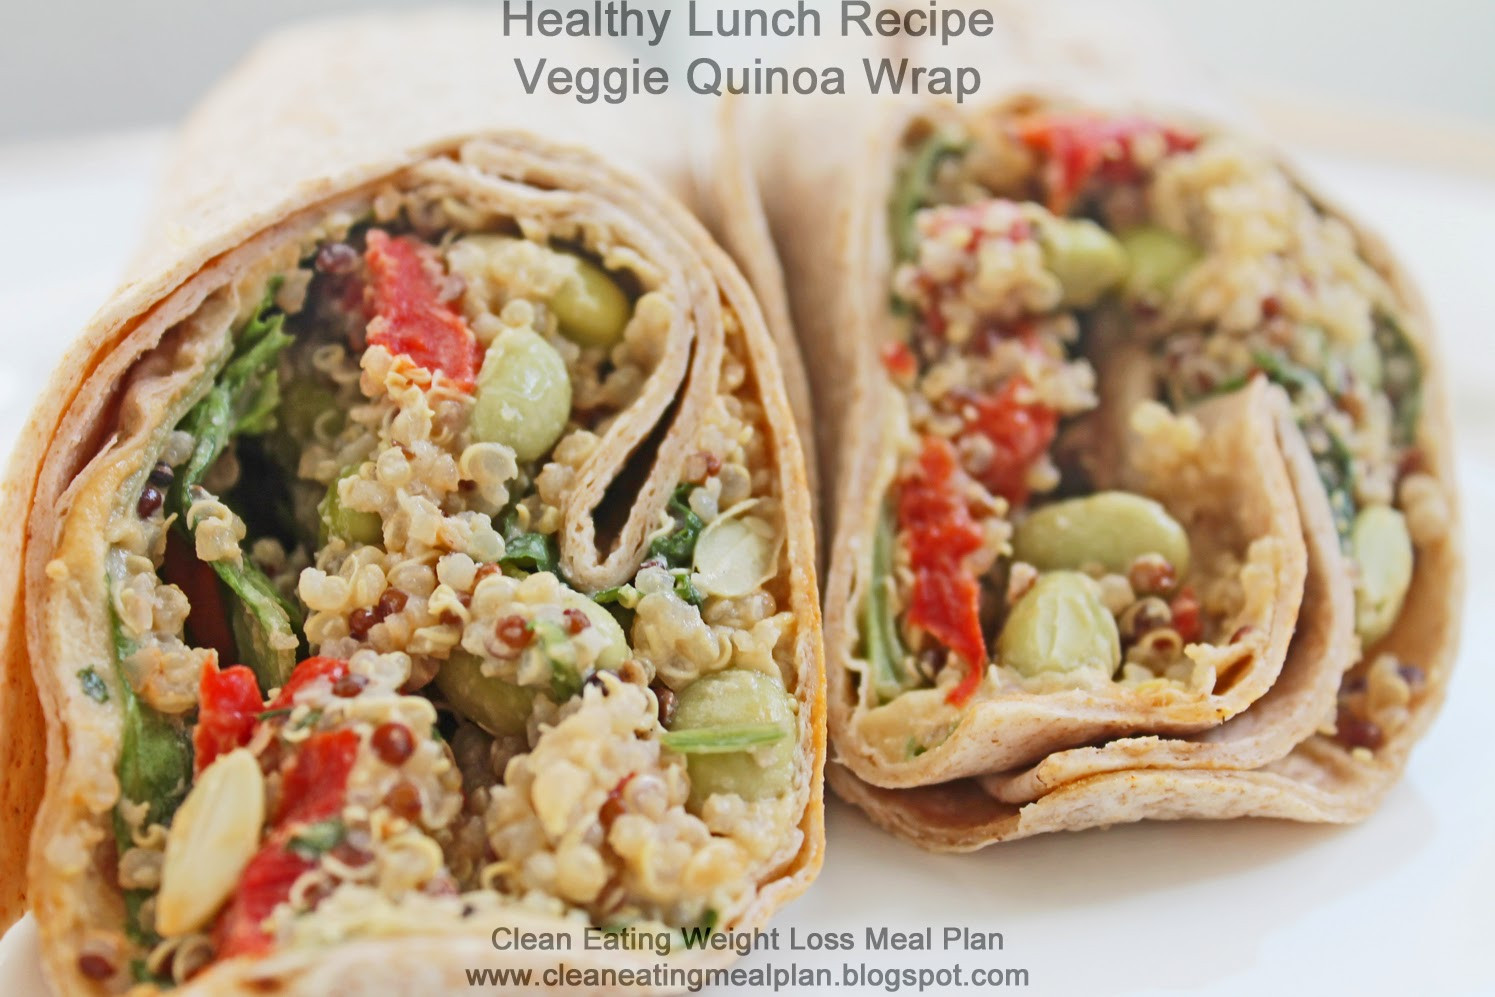 Healthy Sandwich Recipes For Weight Loss
 Best Diet Plans Healthy Lunch Recipe for Weight Loss Meal